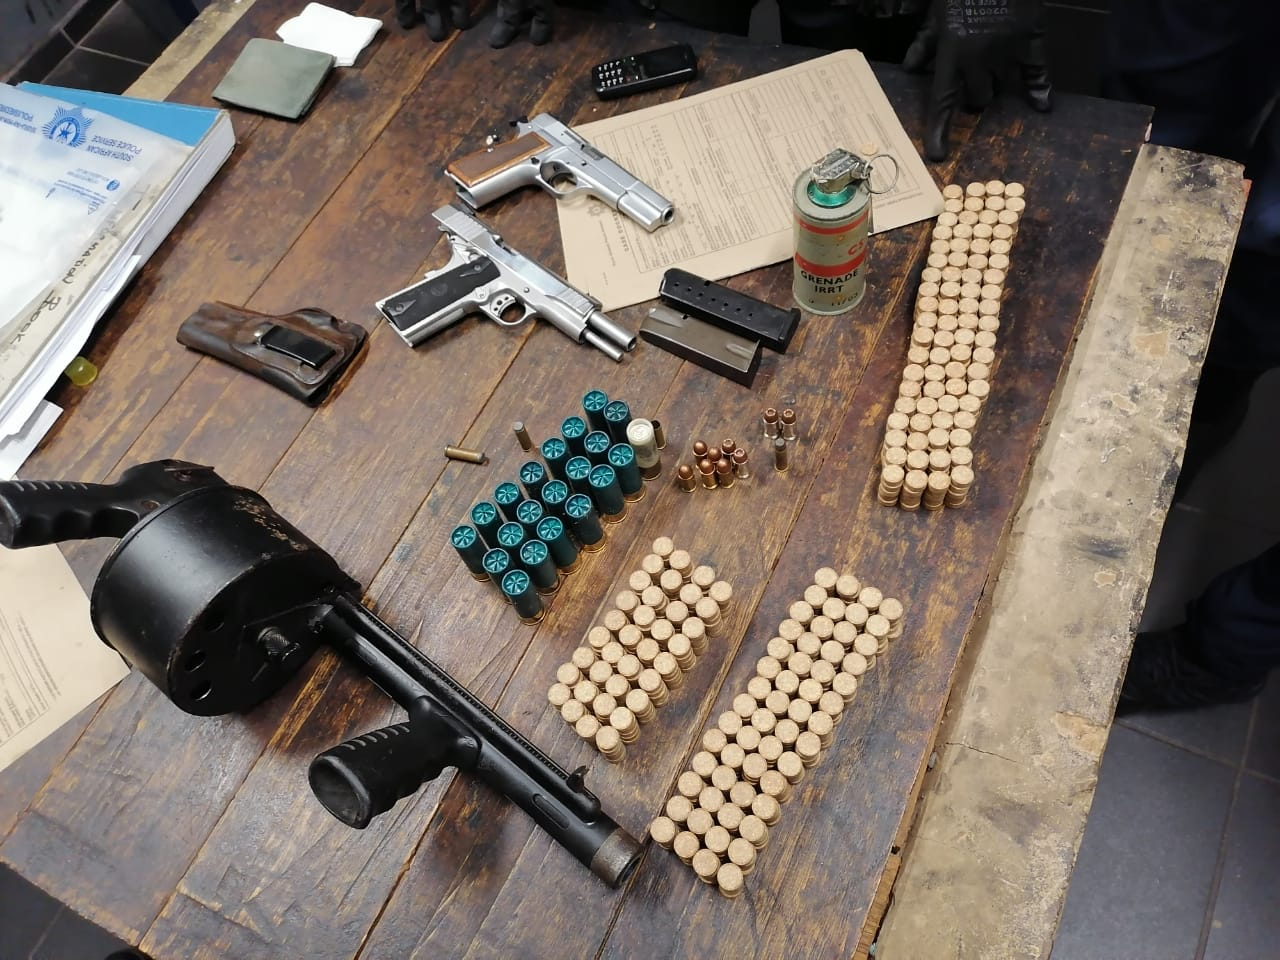 Wentworth man nabbed with firearms and explosive device